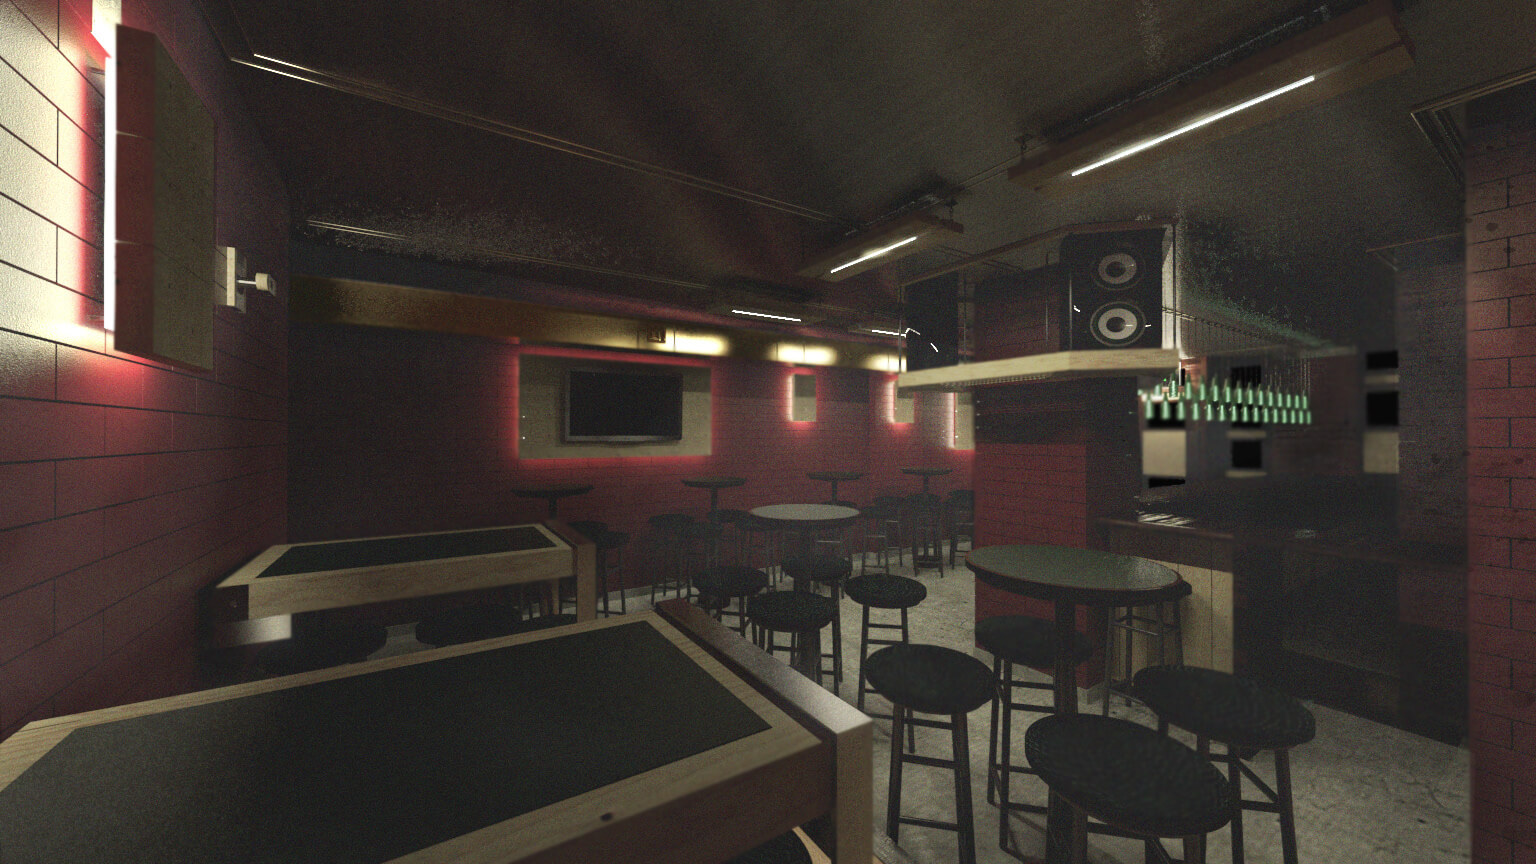 Rendered view from the Interior of the pub showing the furniture, lighting, bar, and architectural layout design